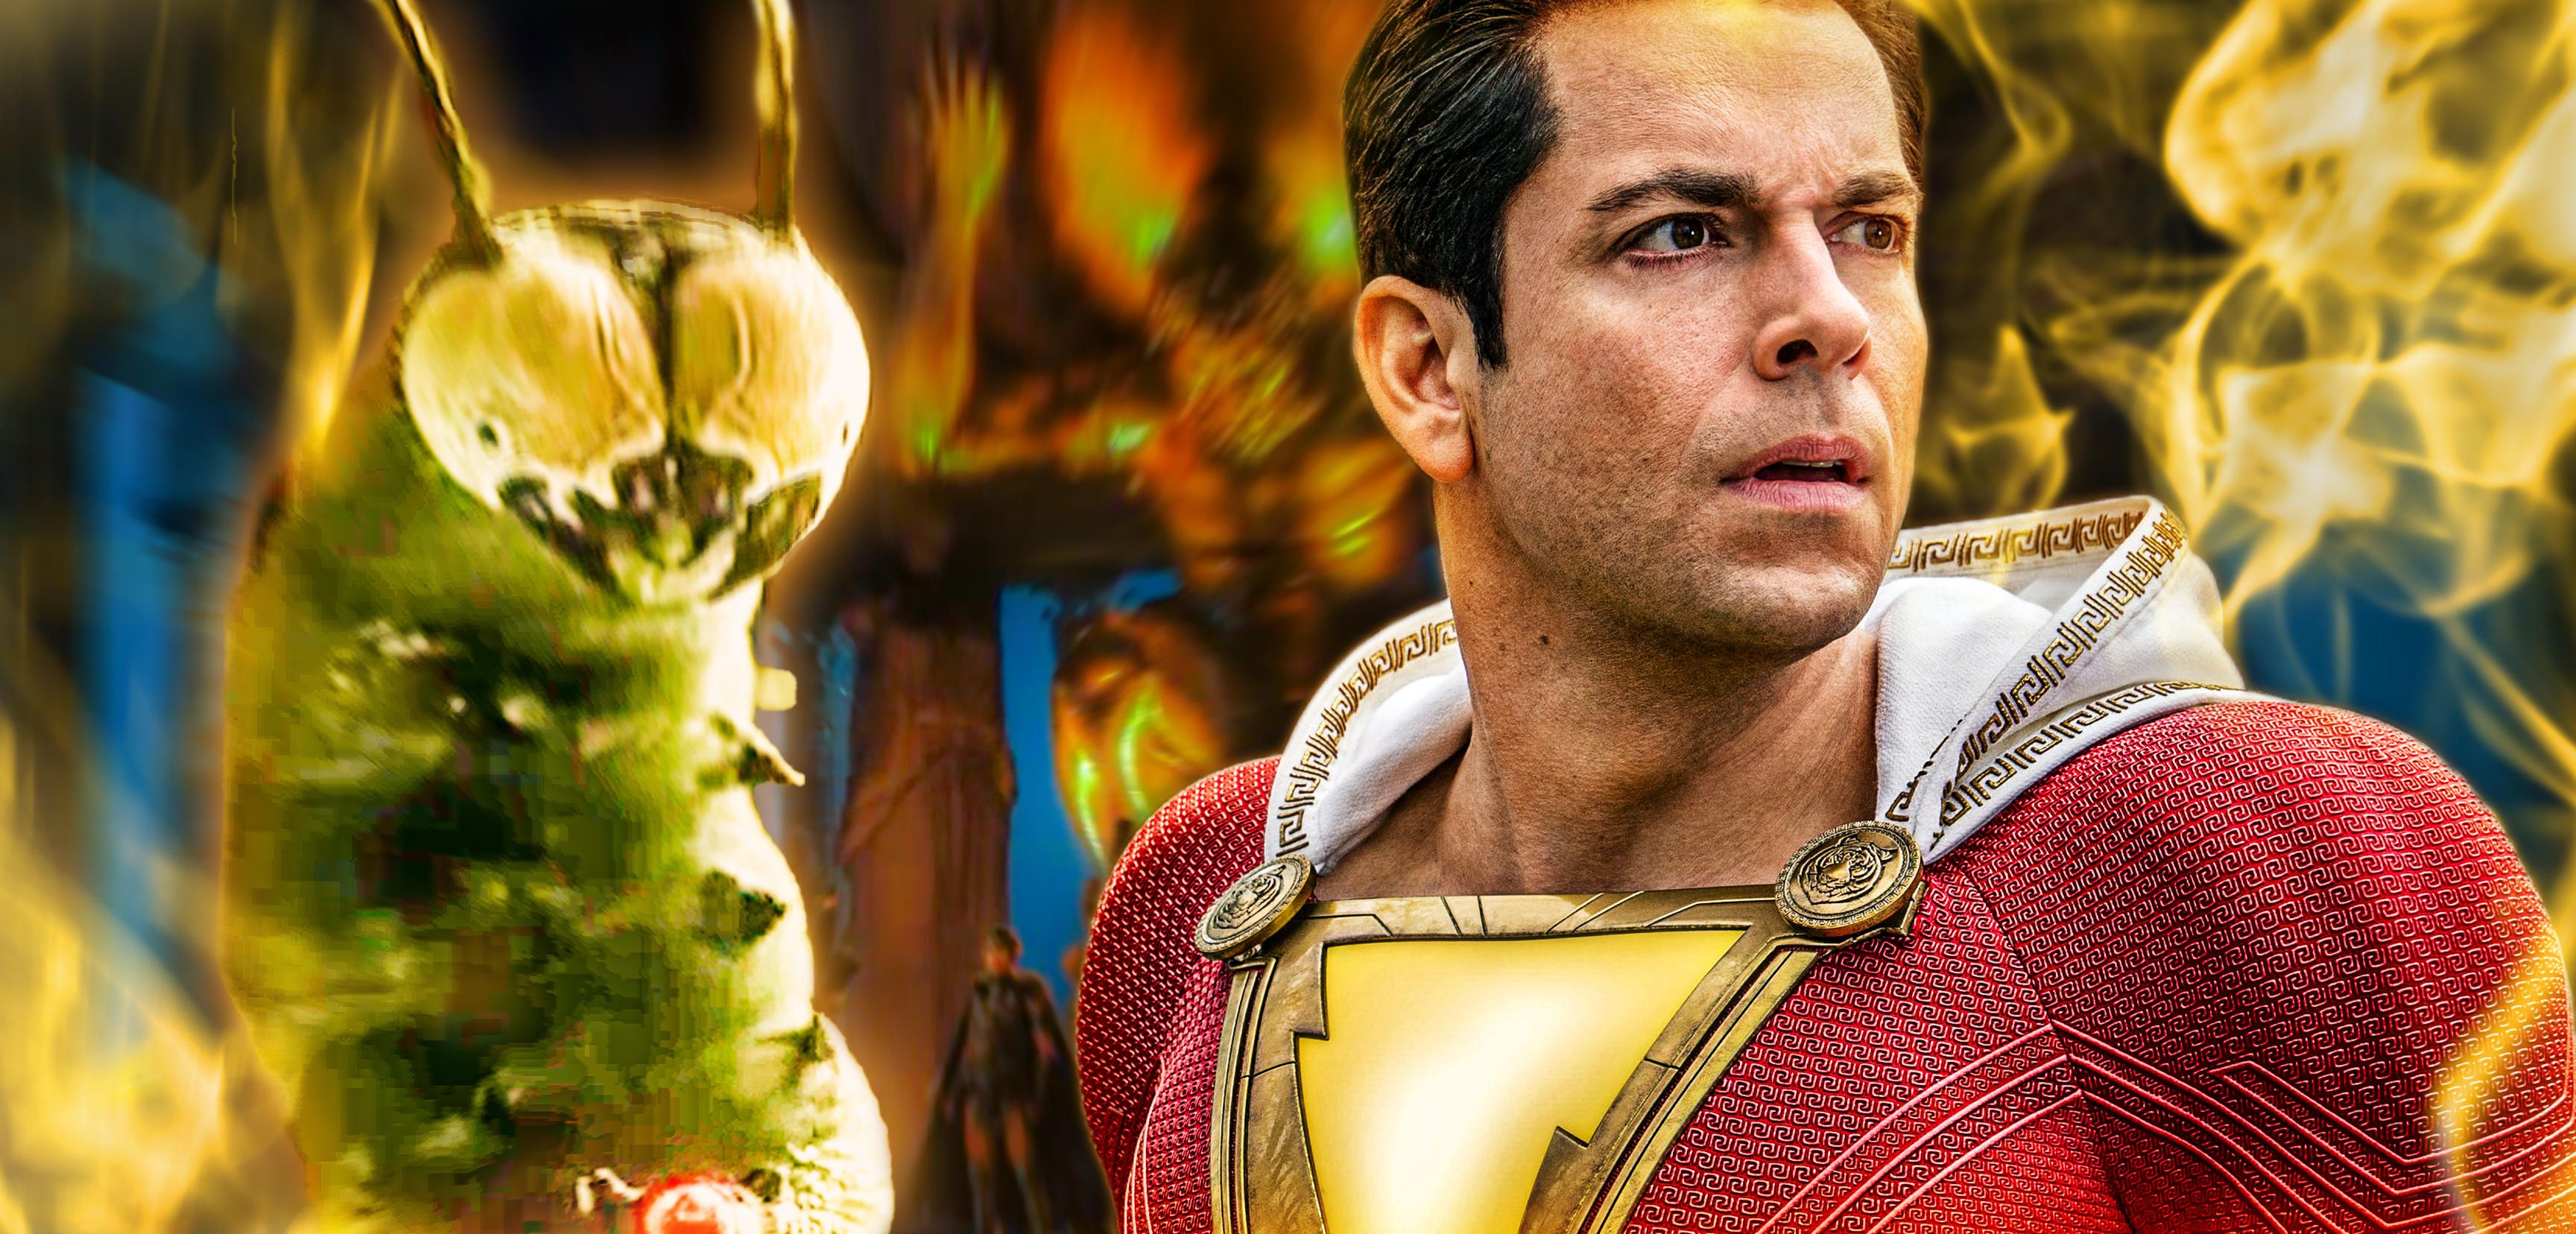 How Shazam 2 Connects to the Larger DC Universe (Spoilers)